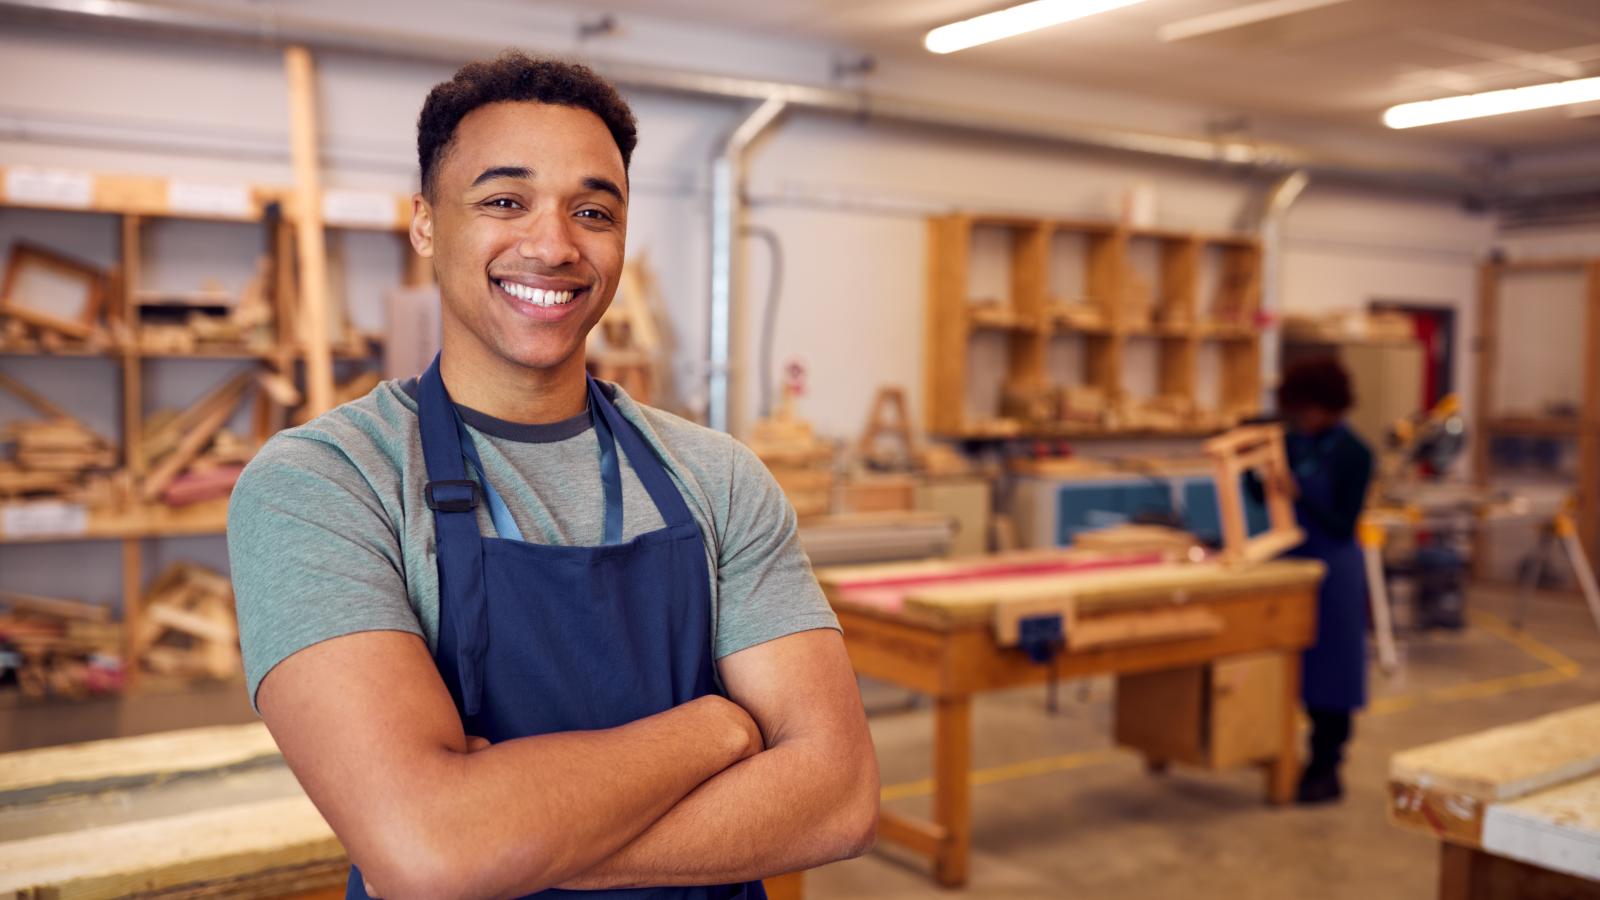 Portrait of young man in workshop